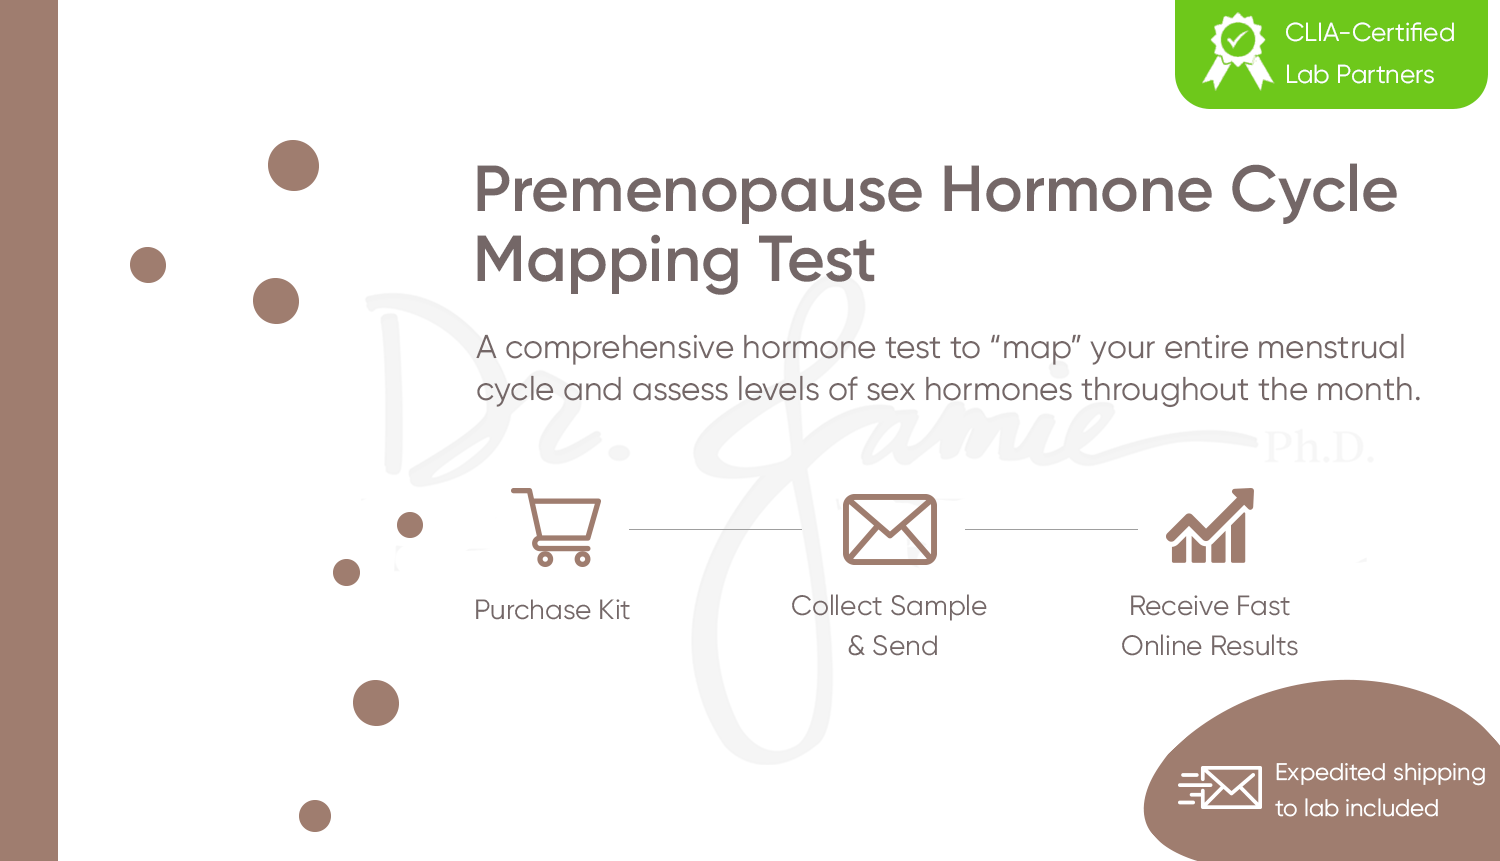 PREMENOPAUSE HORMONE CYCLE MAPPING TEST